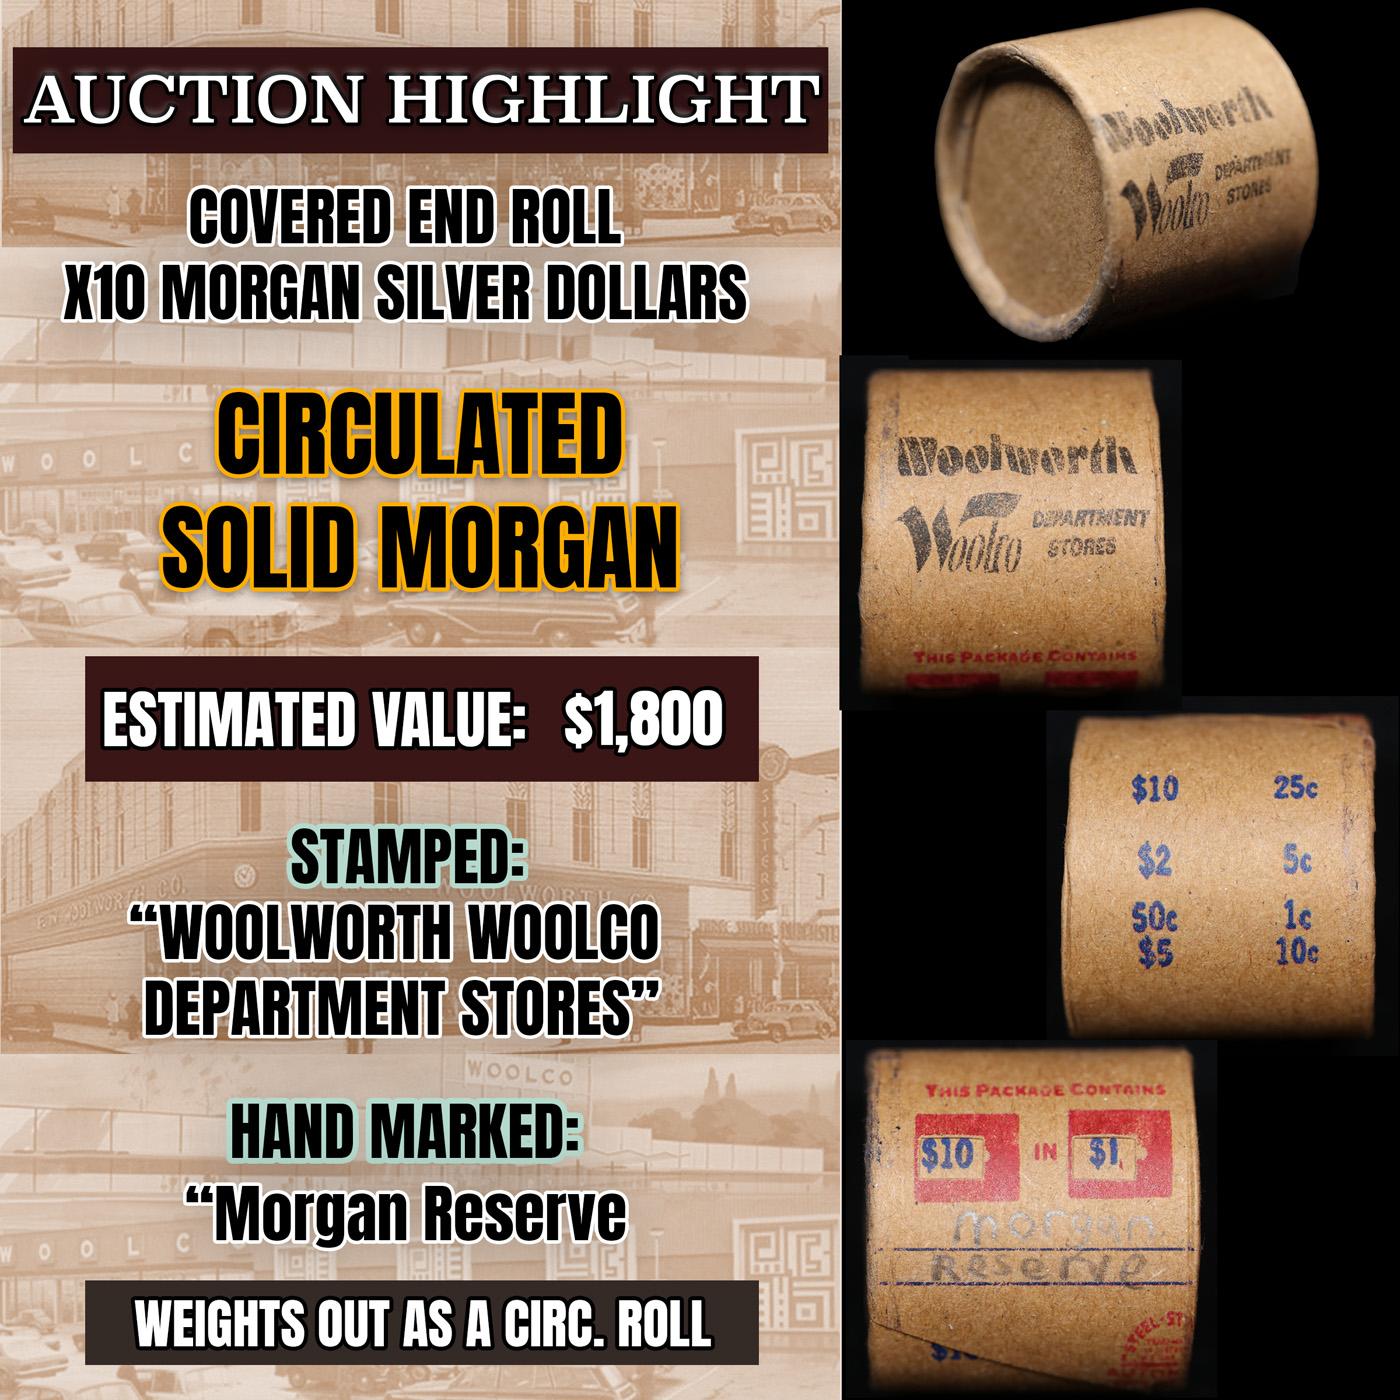 High Value! - Covered End Roll - Marked " Morgan Reserve" - Weight shows x10 Coins (FC)